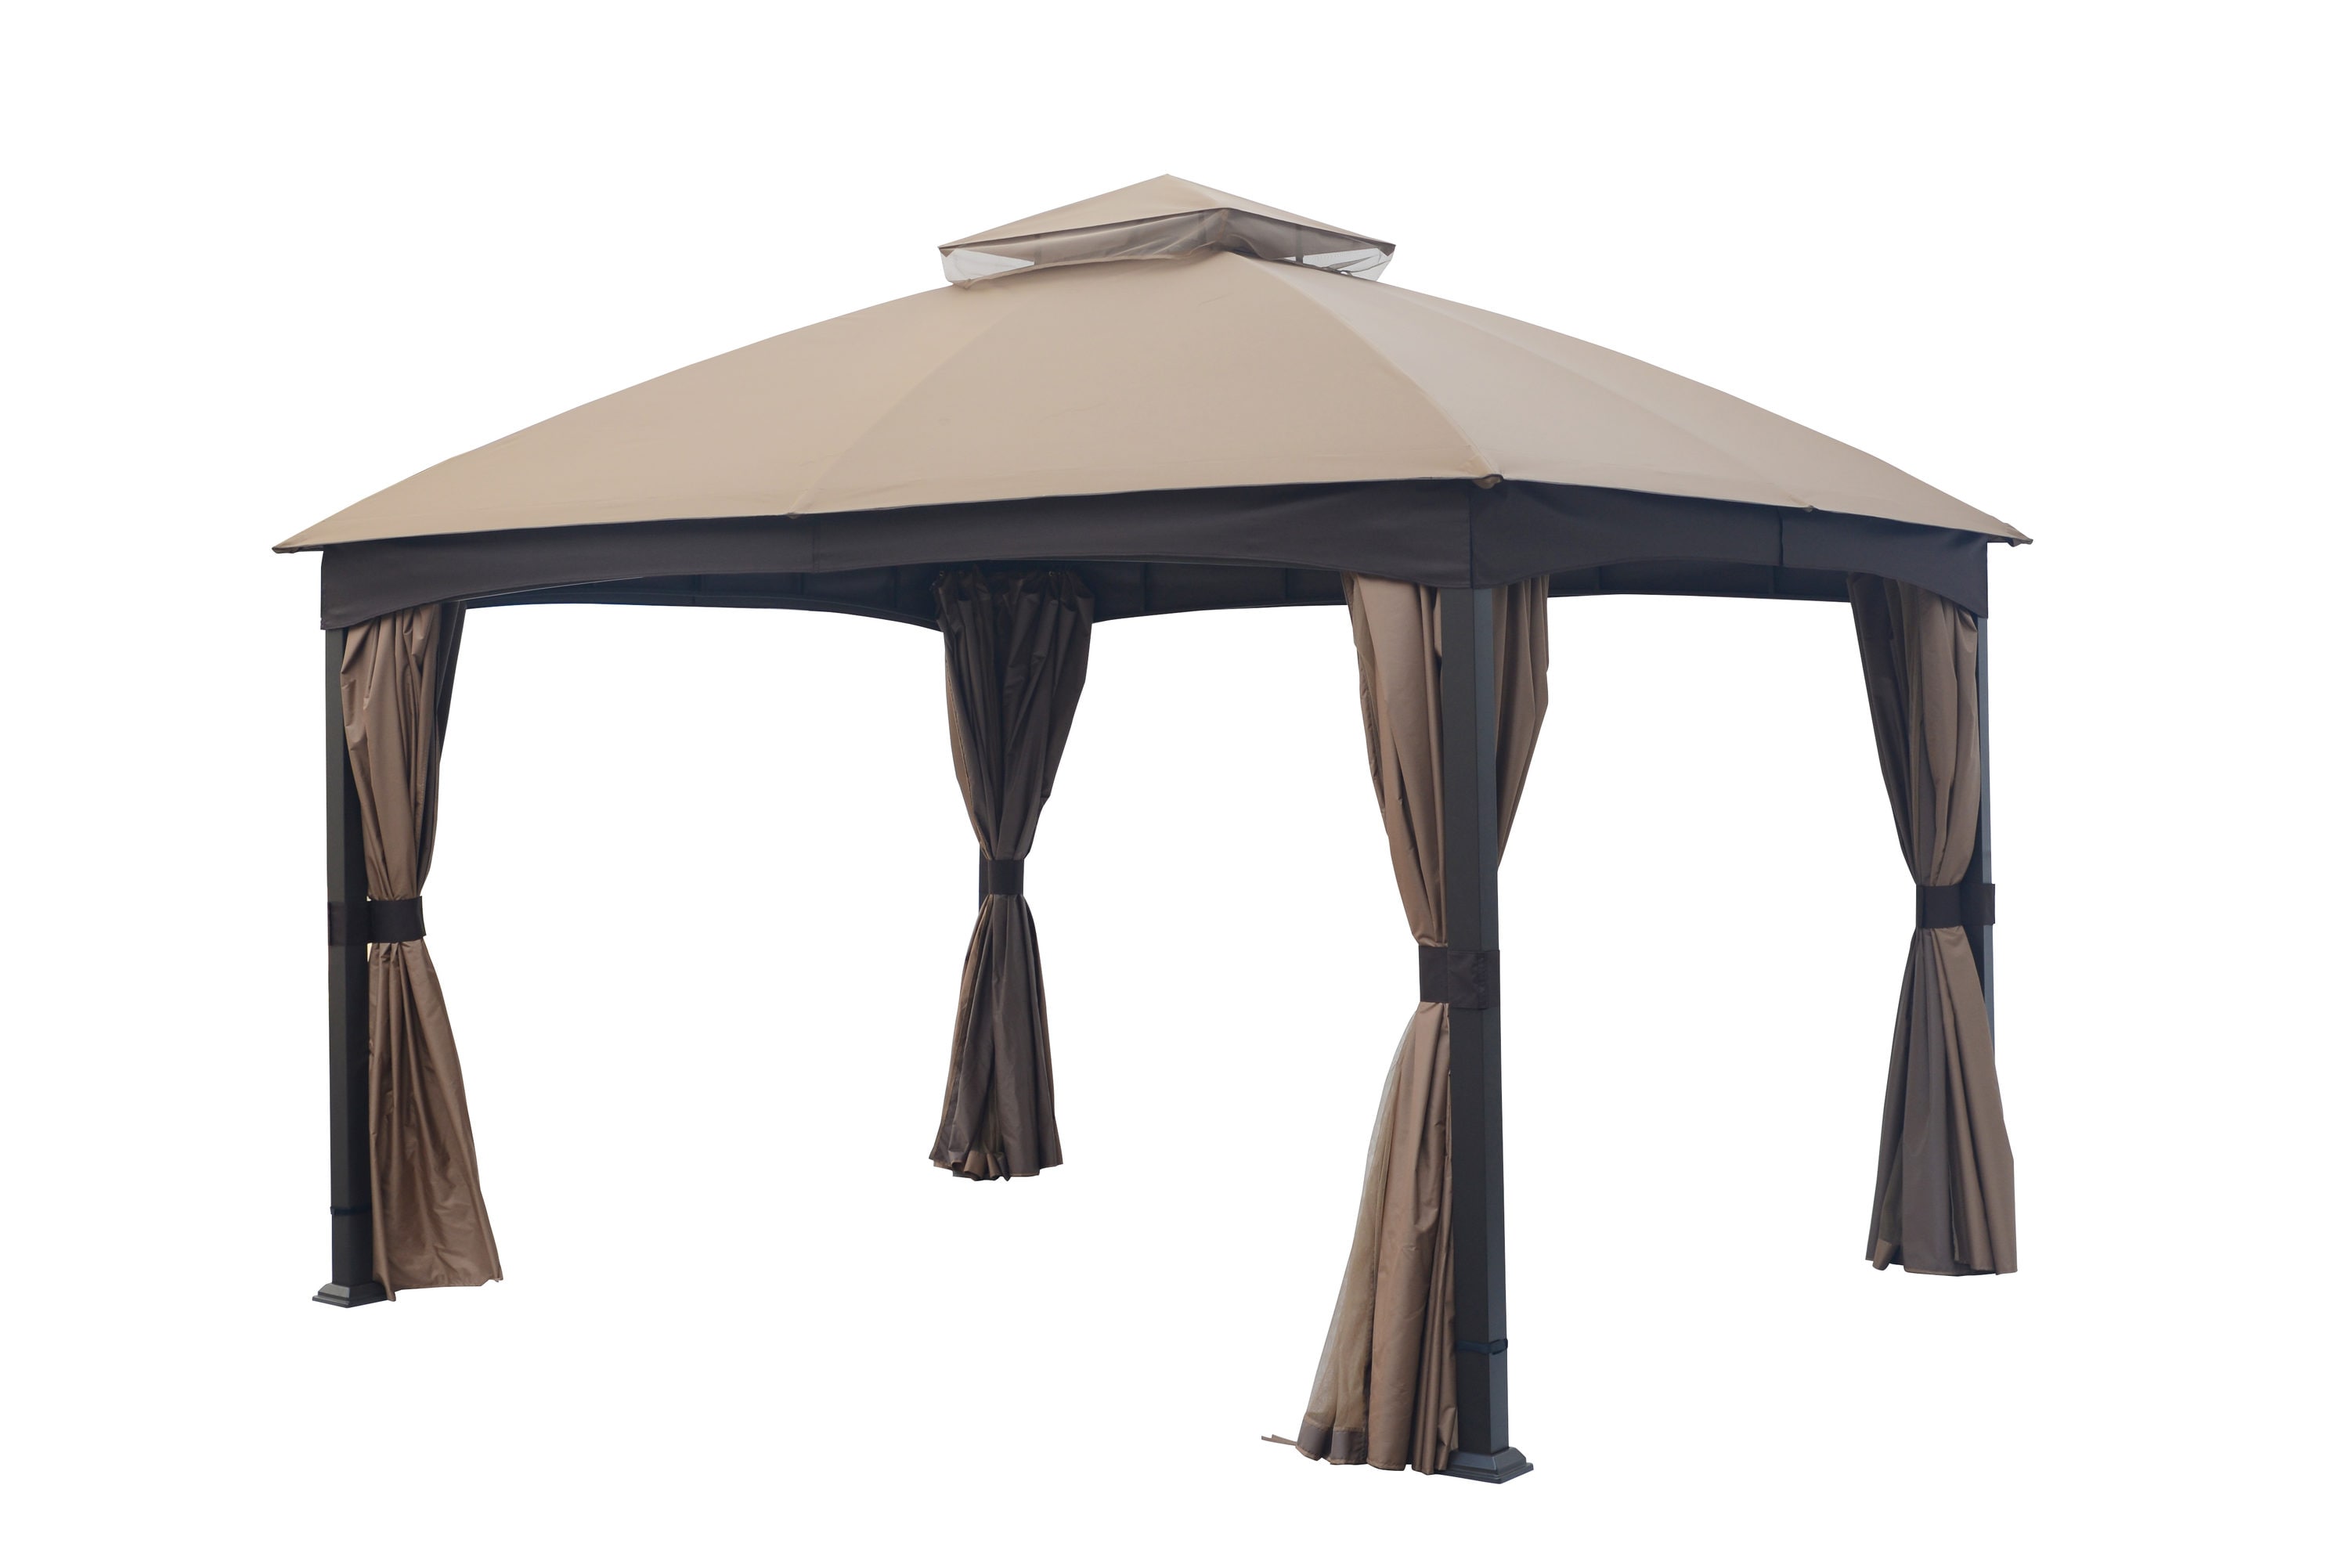 Yescom 2-Tier 12x10ft Outdoor Tent Top Replacement Patio Canopy Cover for Yard Lowe's Allen Roth Gazebo #GF-12S004B-1 